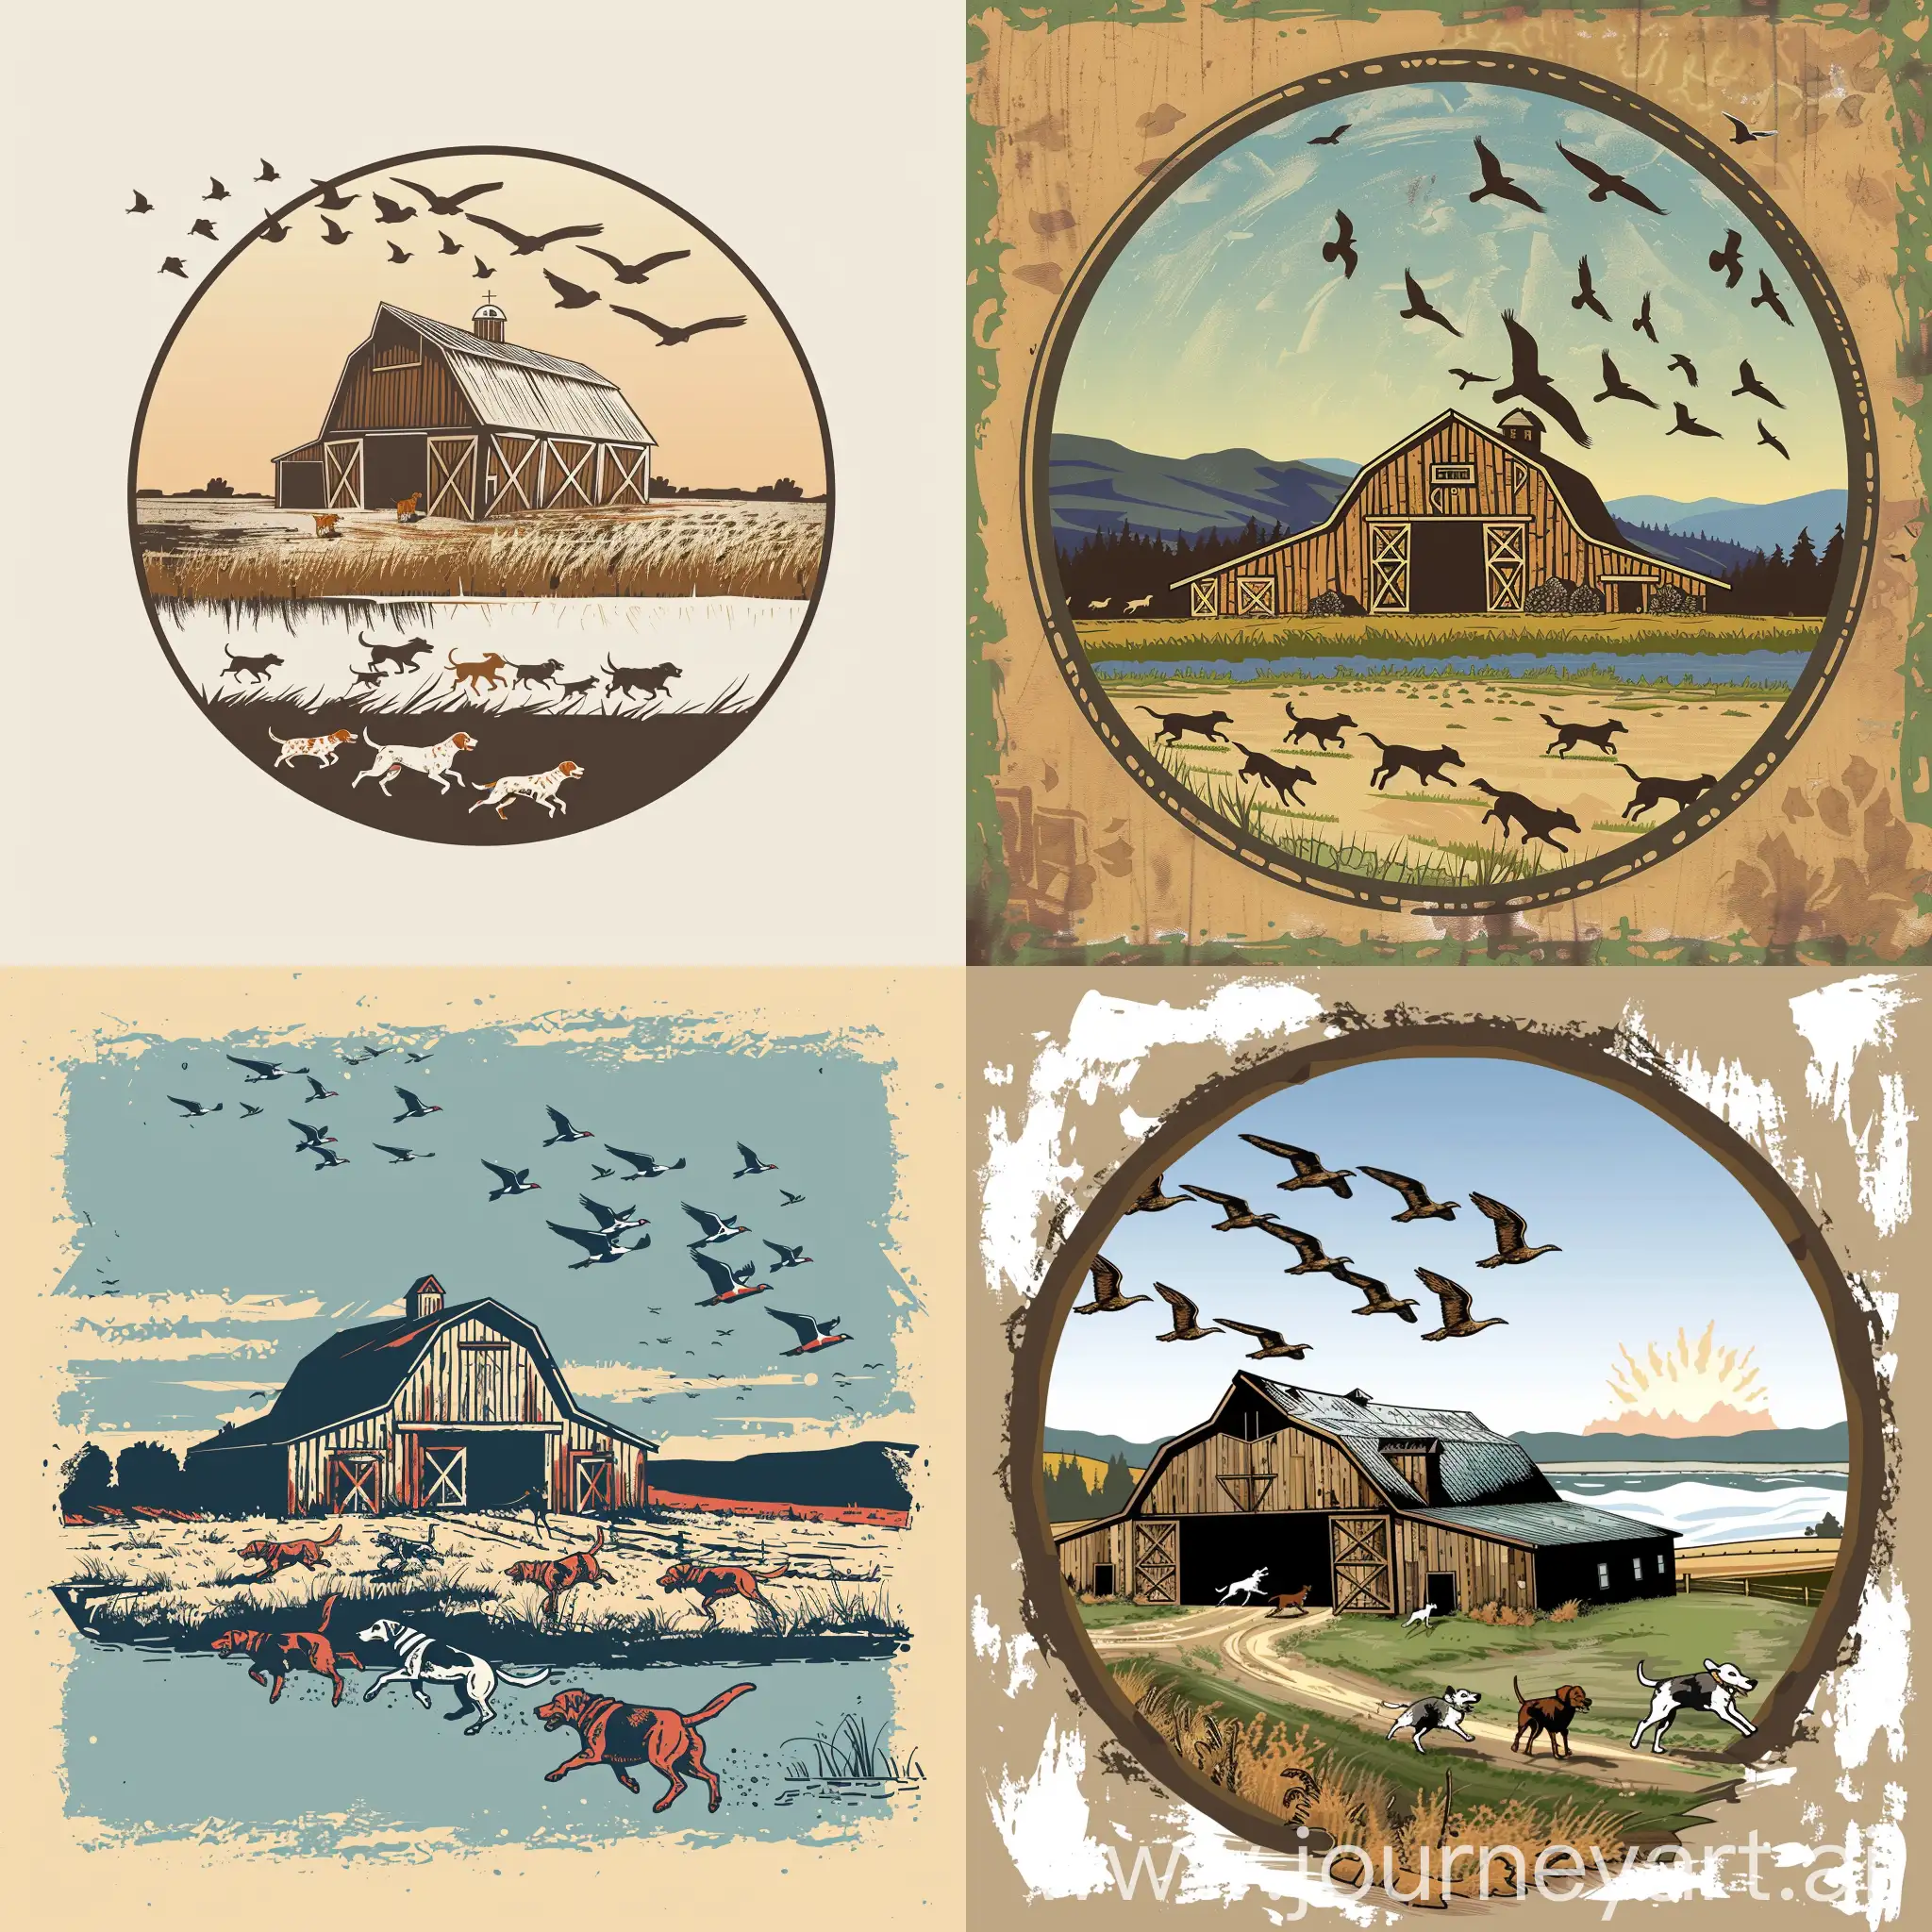  A logo design of a rustic barn with dogs running free in open land with a lake and maybe a flock of birds soaring
